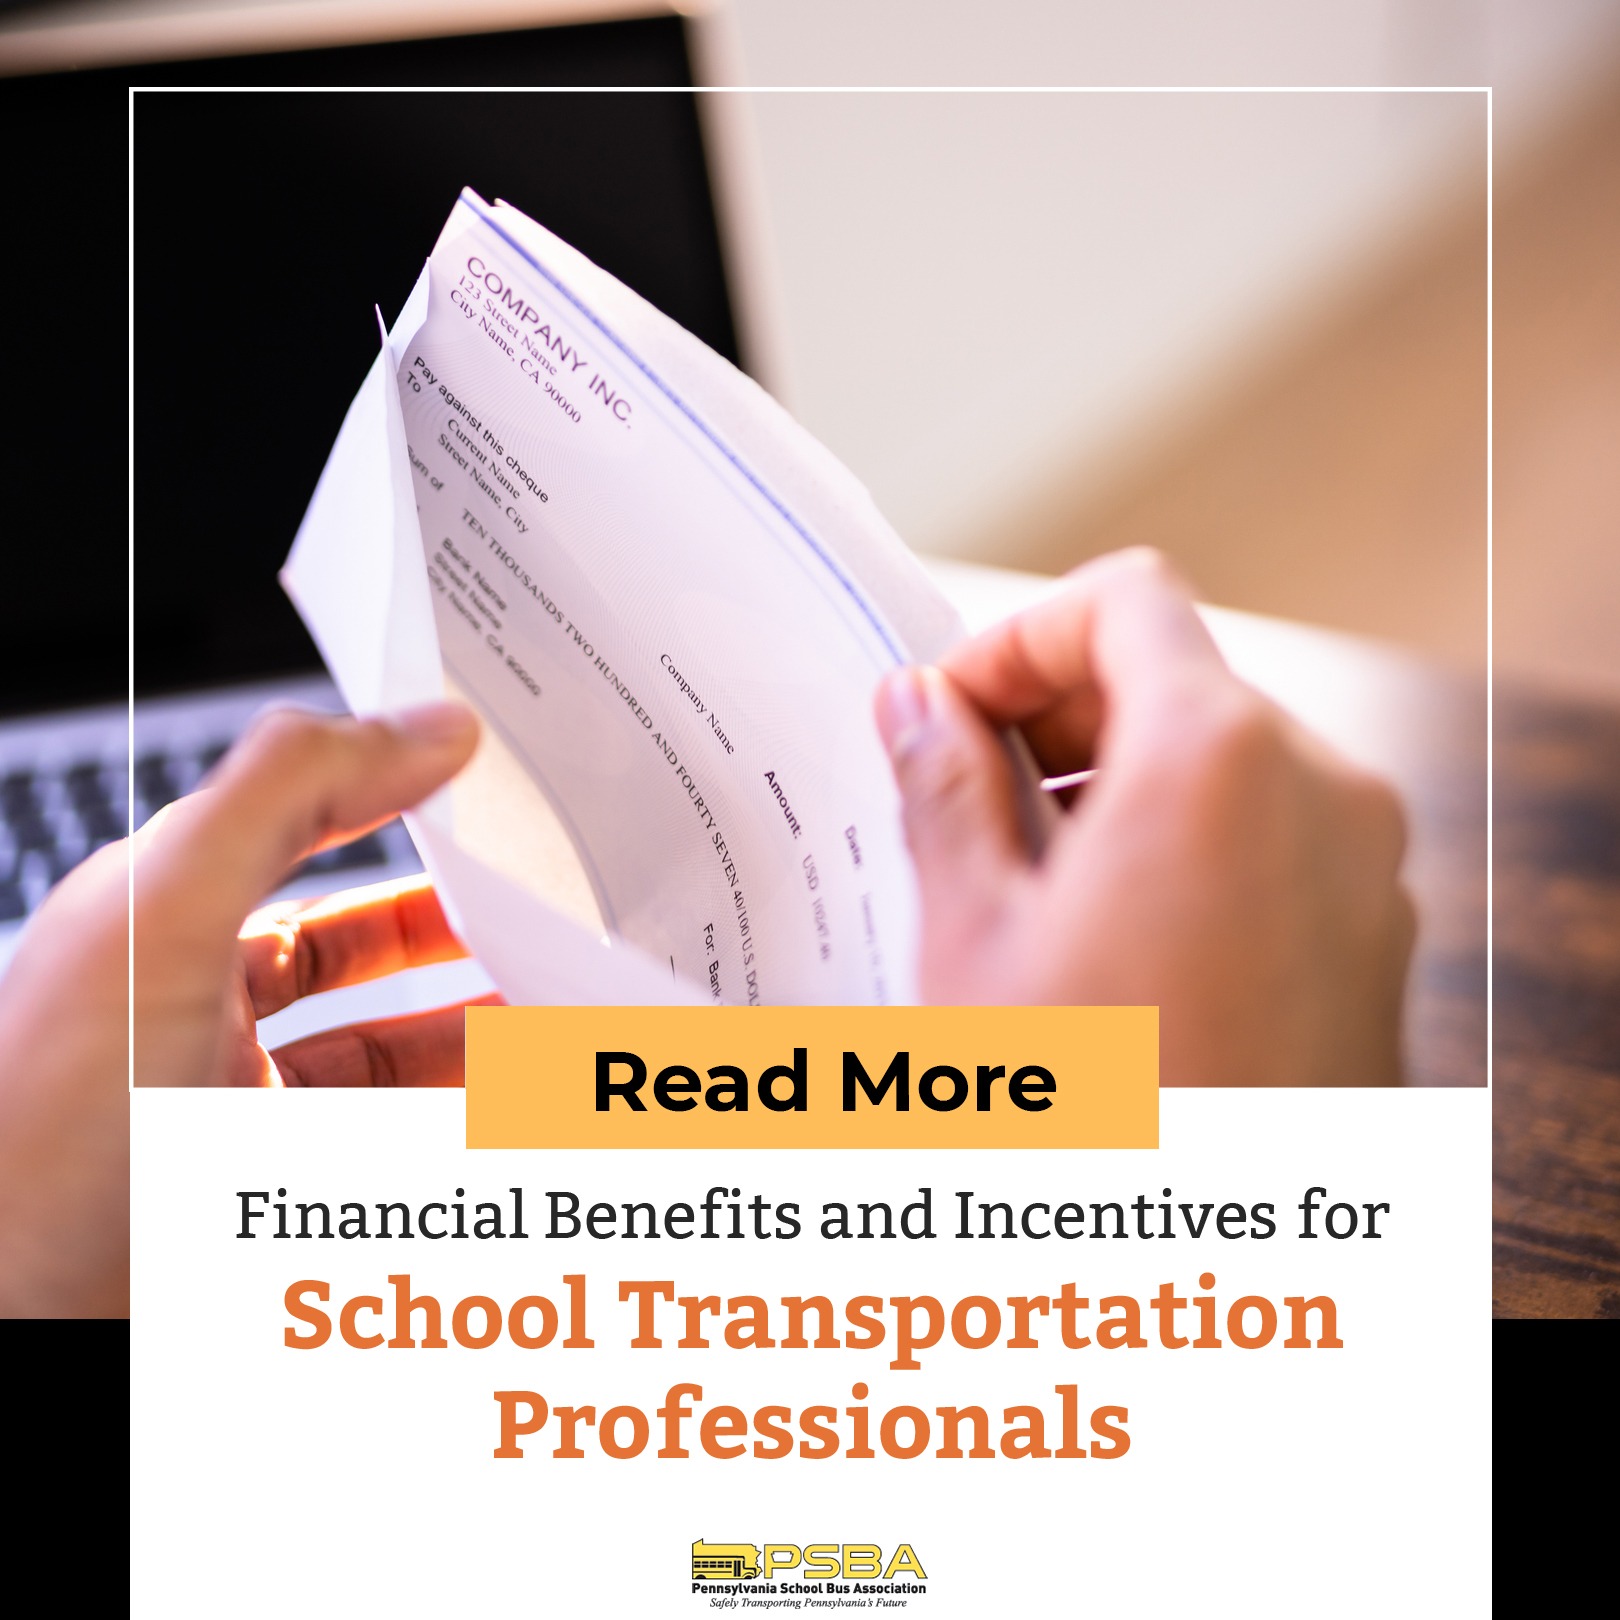 Financial Benefits and Incentives for School Transportation Professionals